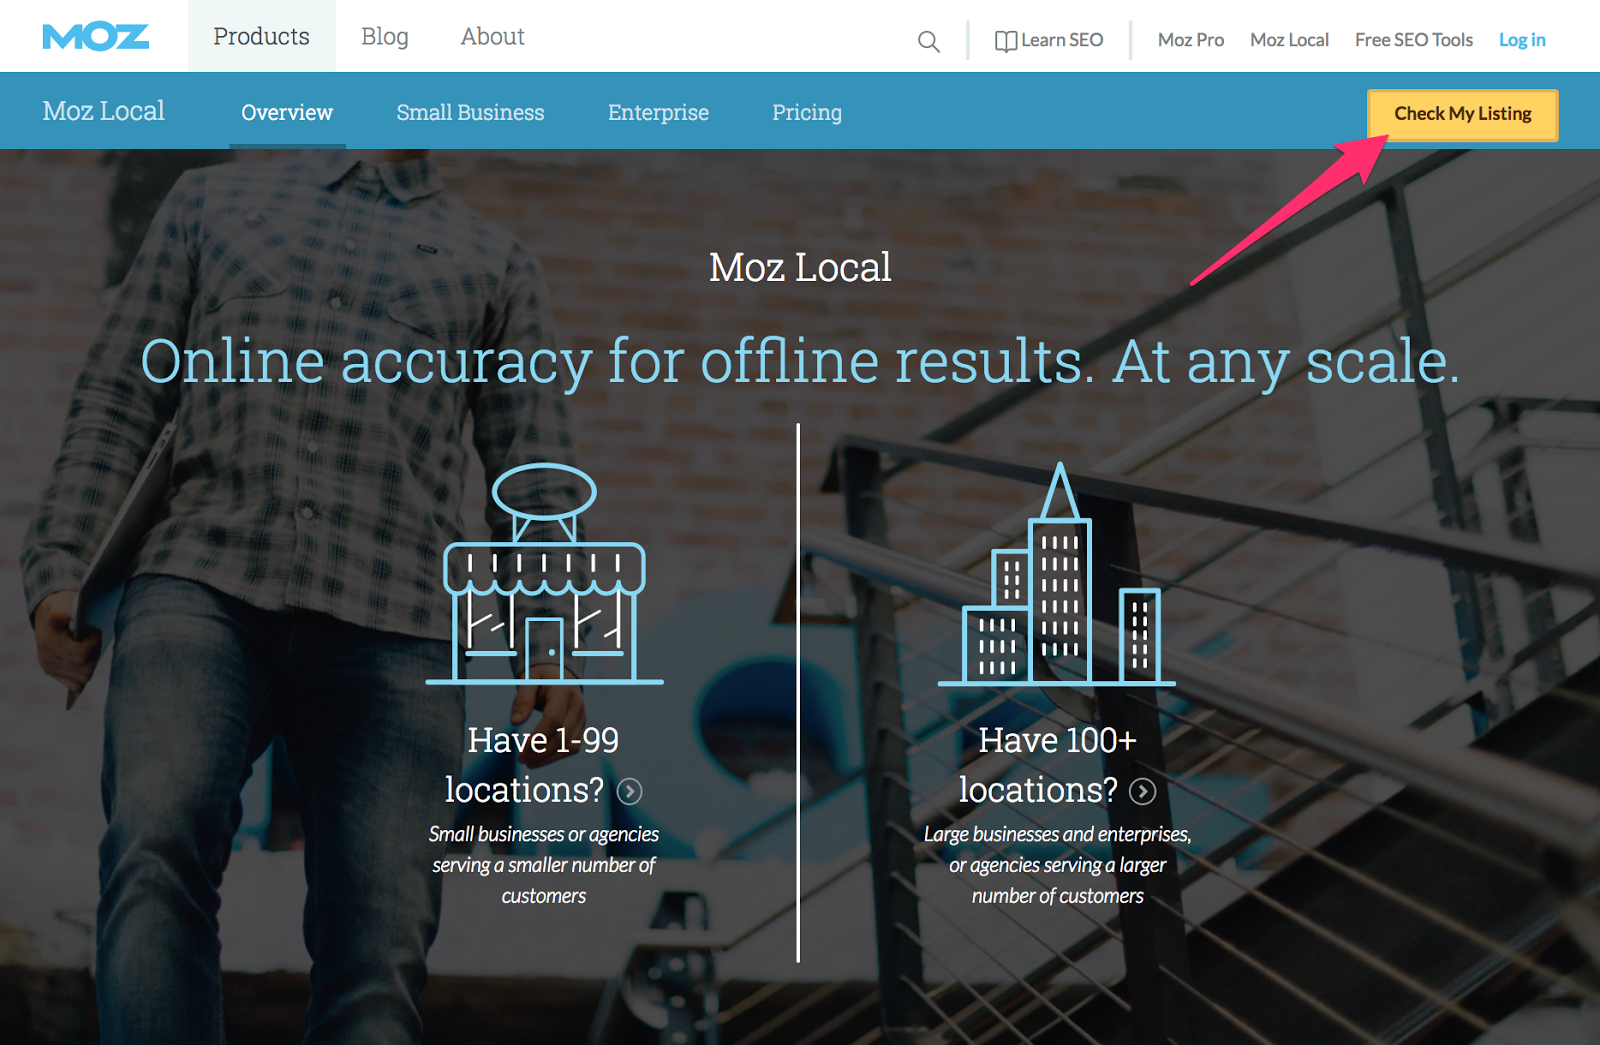 Moz Local Overview Moz